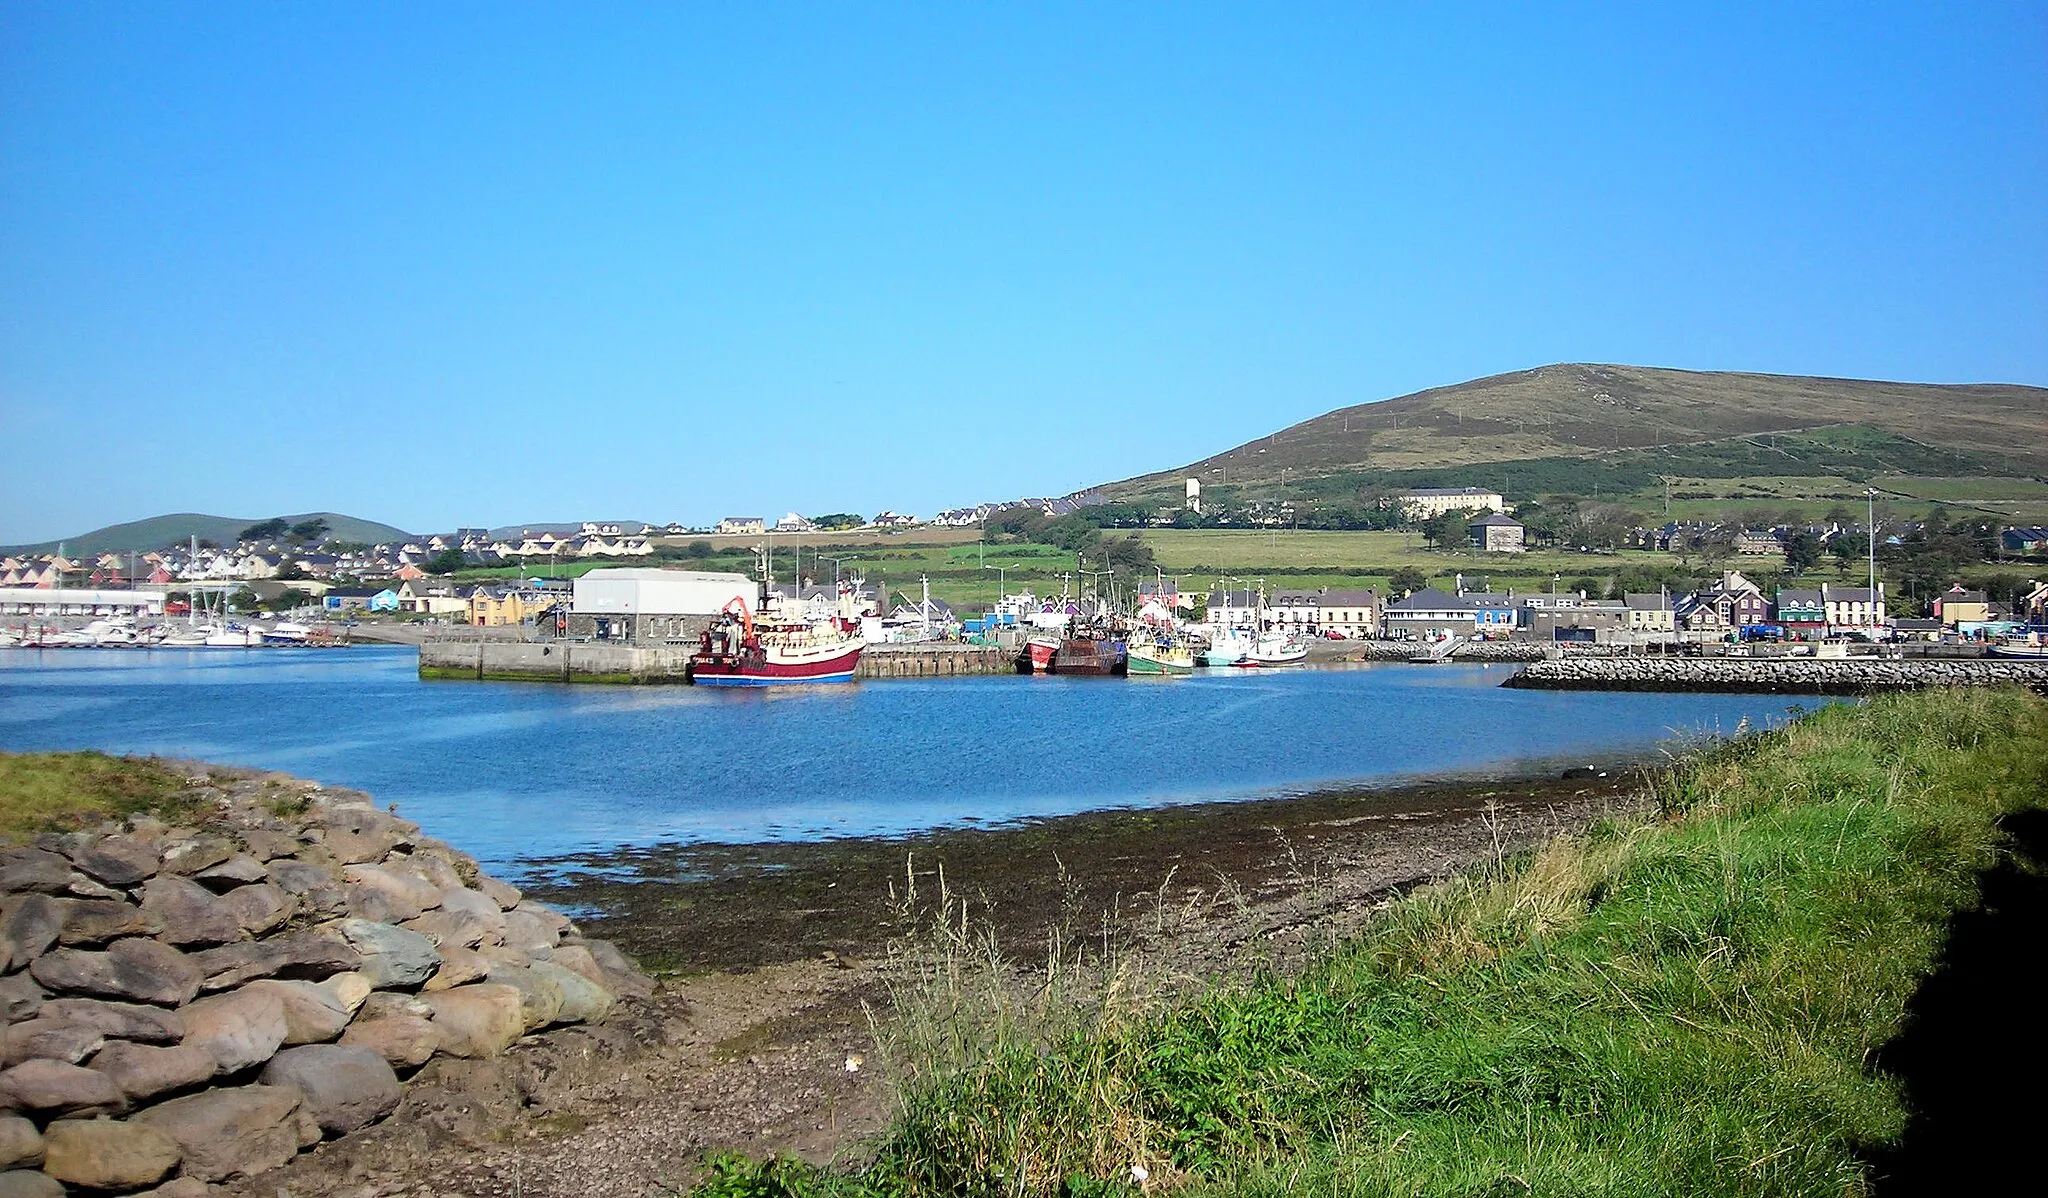 Photo showing: Fishing and farming have long been the major industries, but tourism has become an increasingly important business in the town, particularly since the filming of "Ryan's Daughter" in the area in 1969.